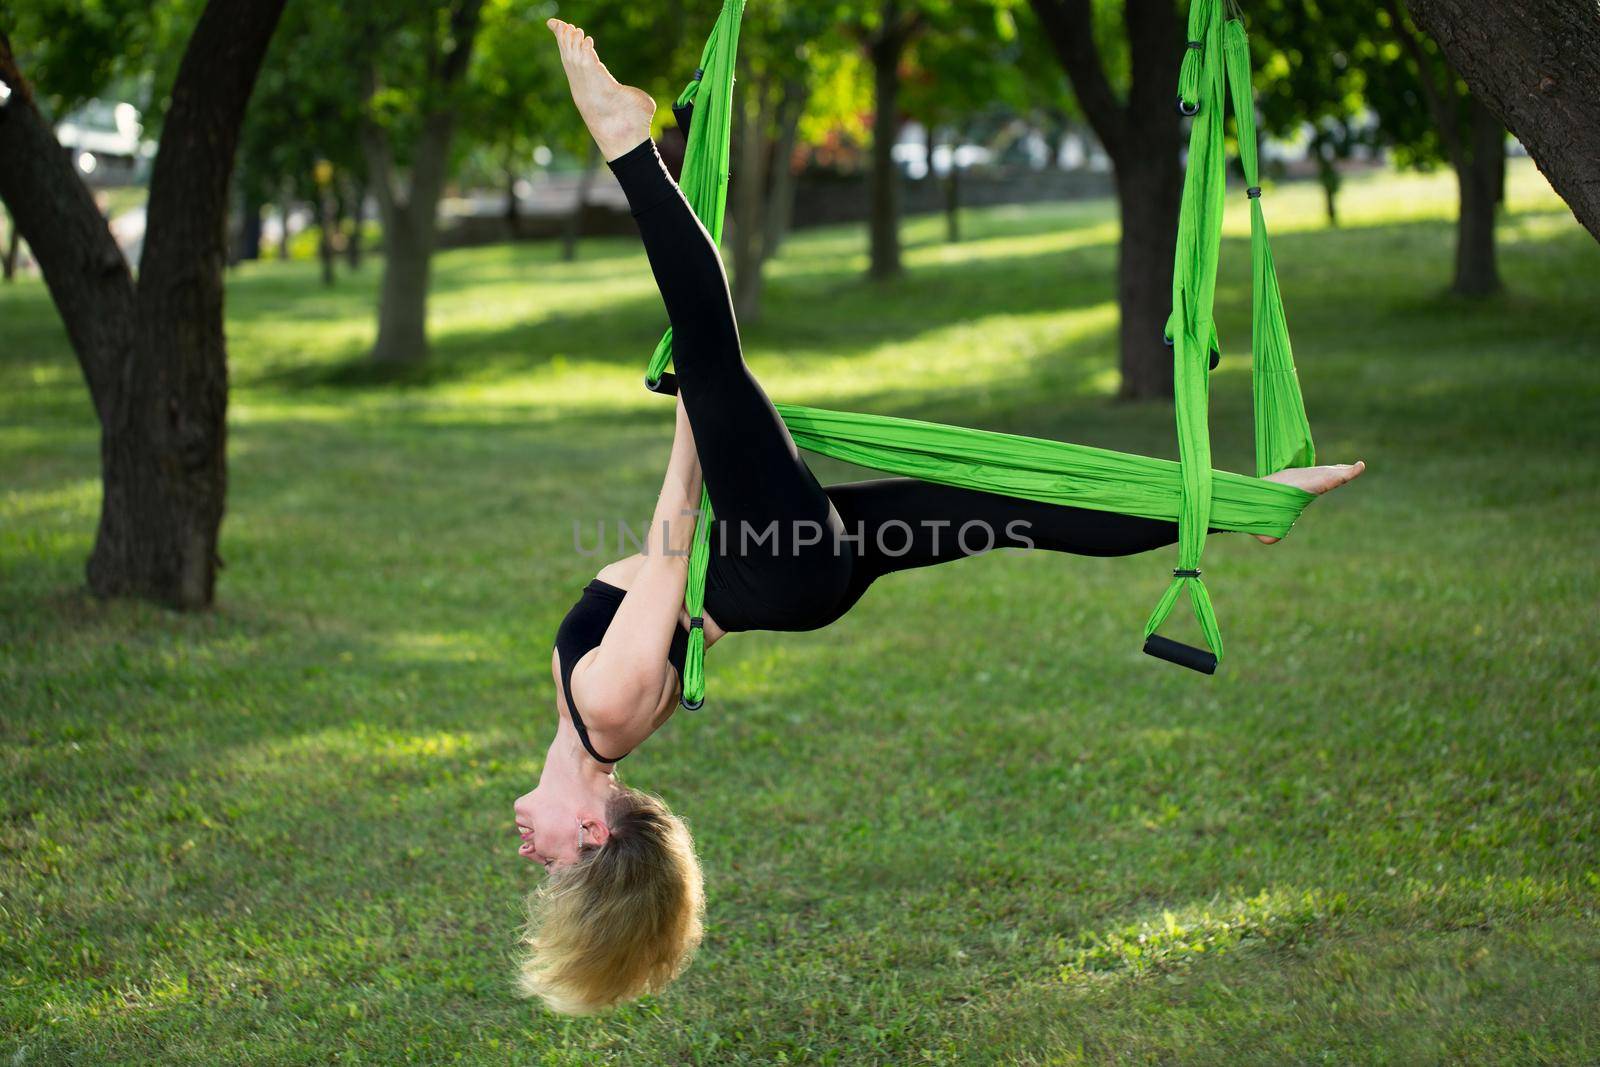 Anti-gravity Yoga, woman doing yoga exercises in the park. by StudioPeace